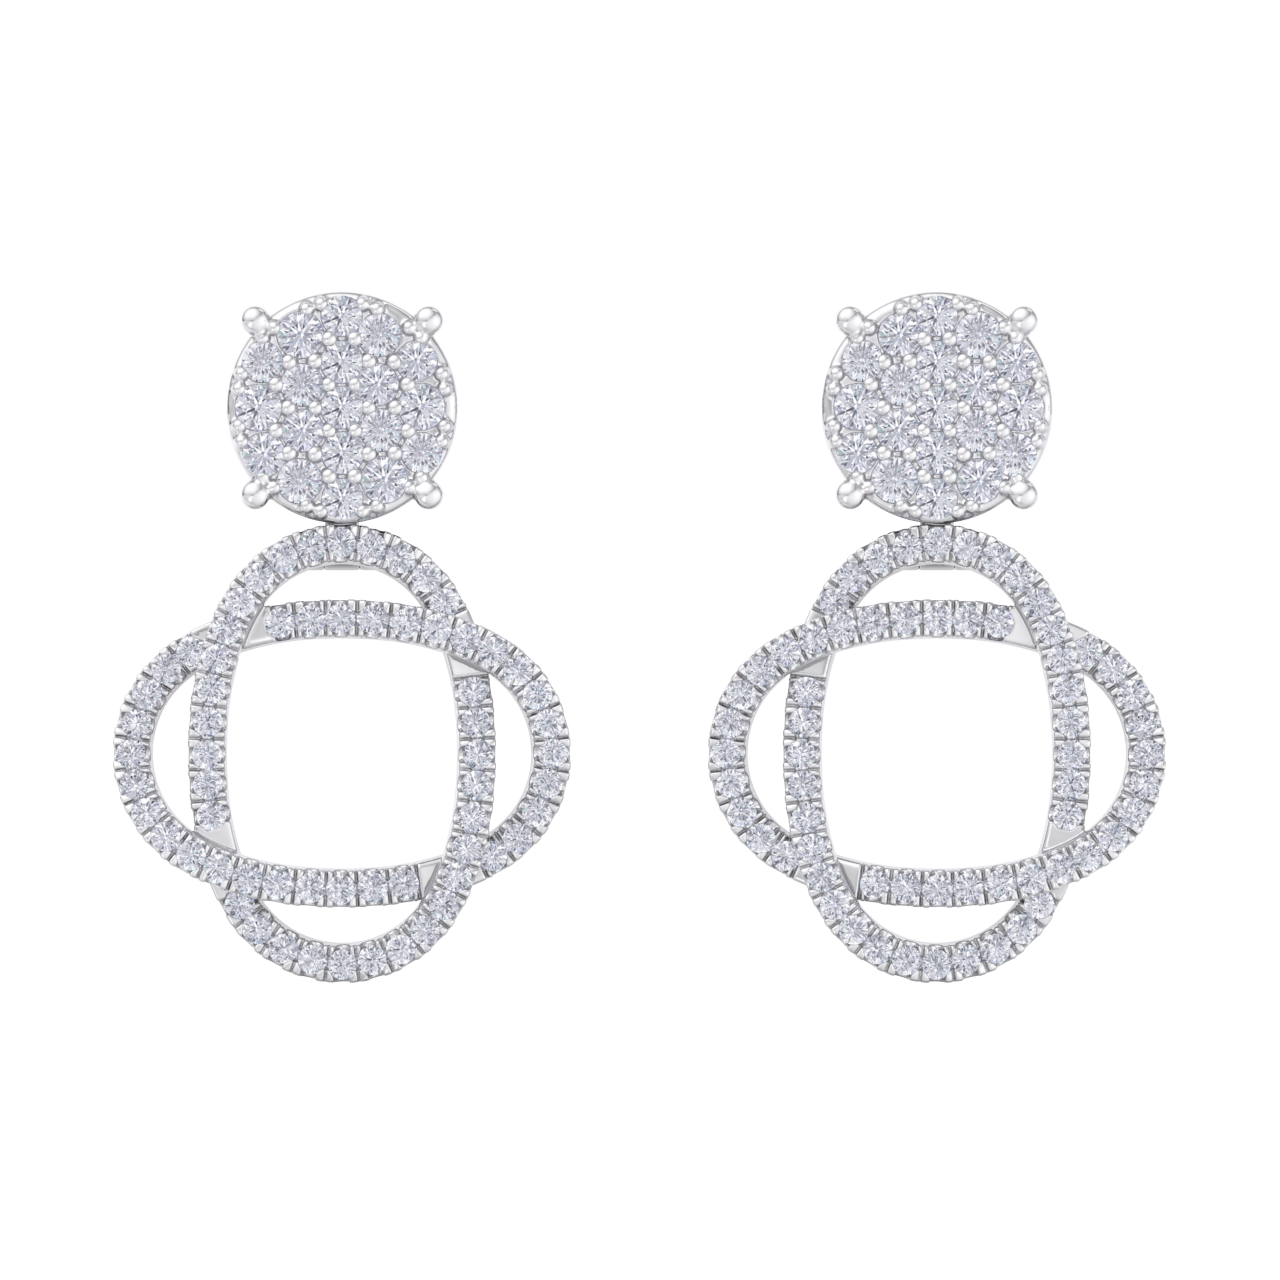 3 in 1 earrings in white gold with white diamonds of 1.01 ct in weight